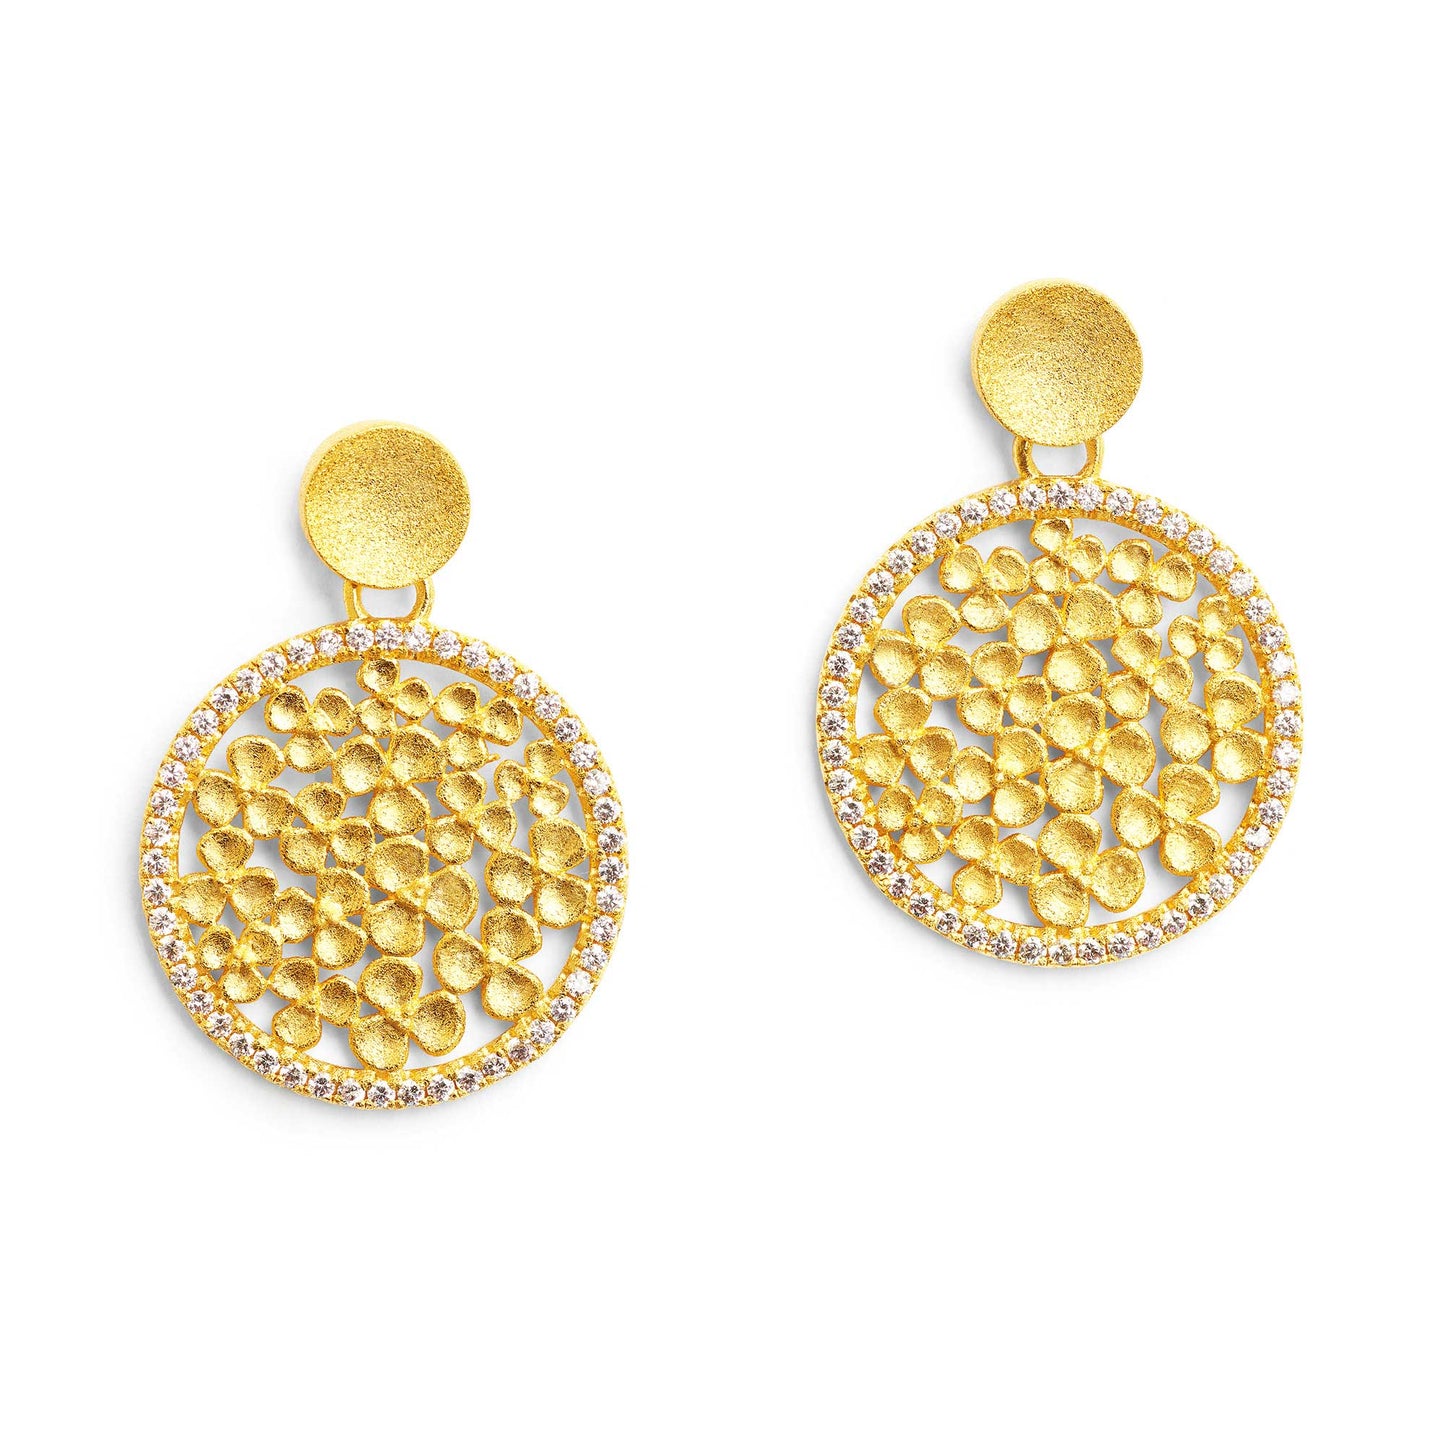 Bernd Wolf Collection "Leilana" Earrings